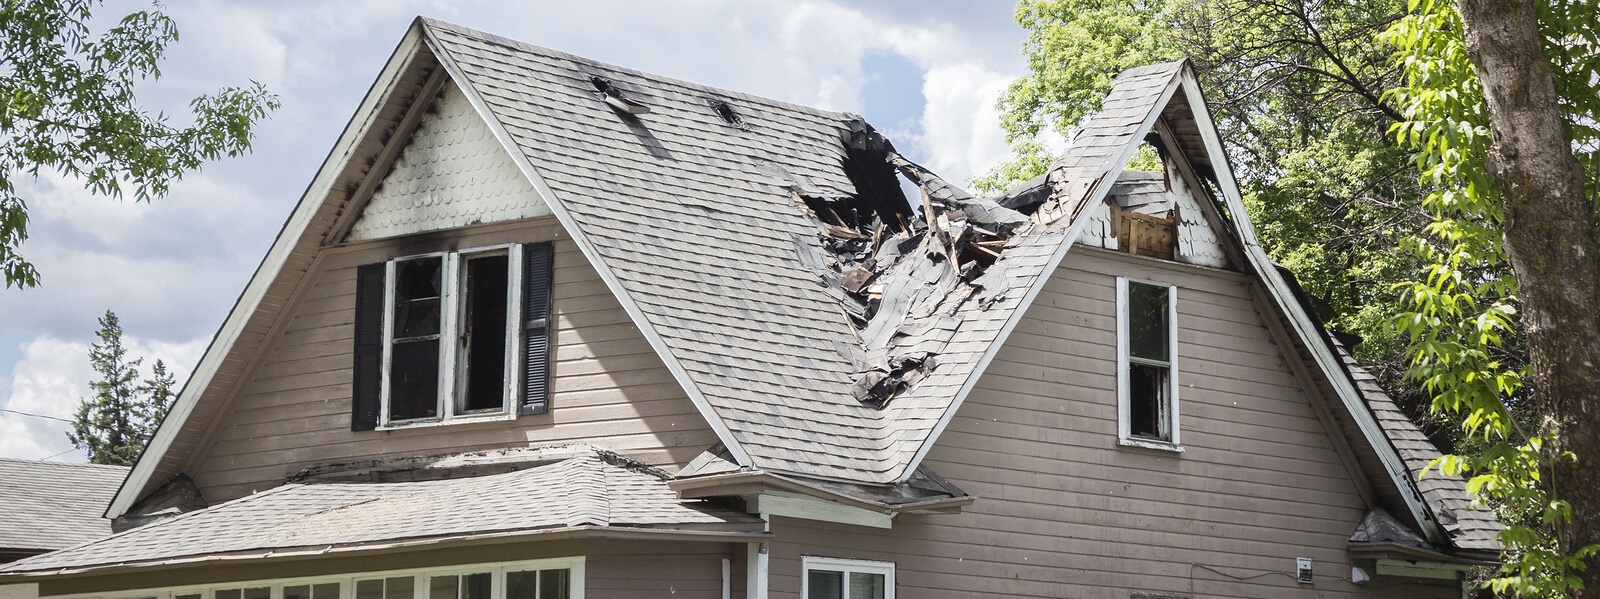 Emergency Roofing Gaithersburg MD | GoodGood Roofing & Siding